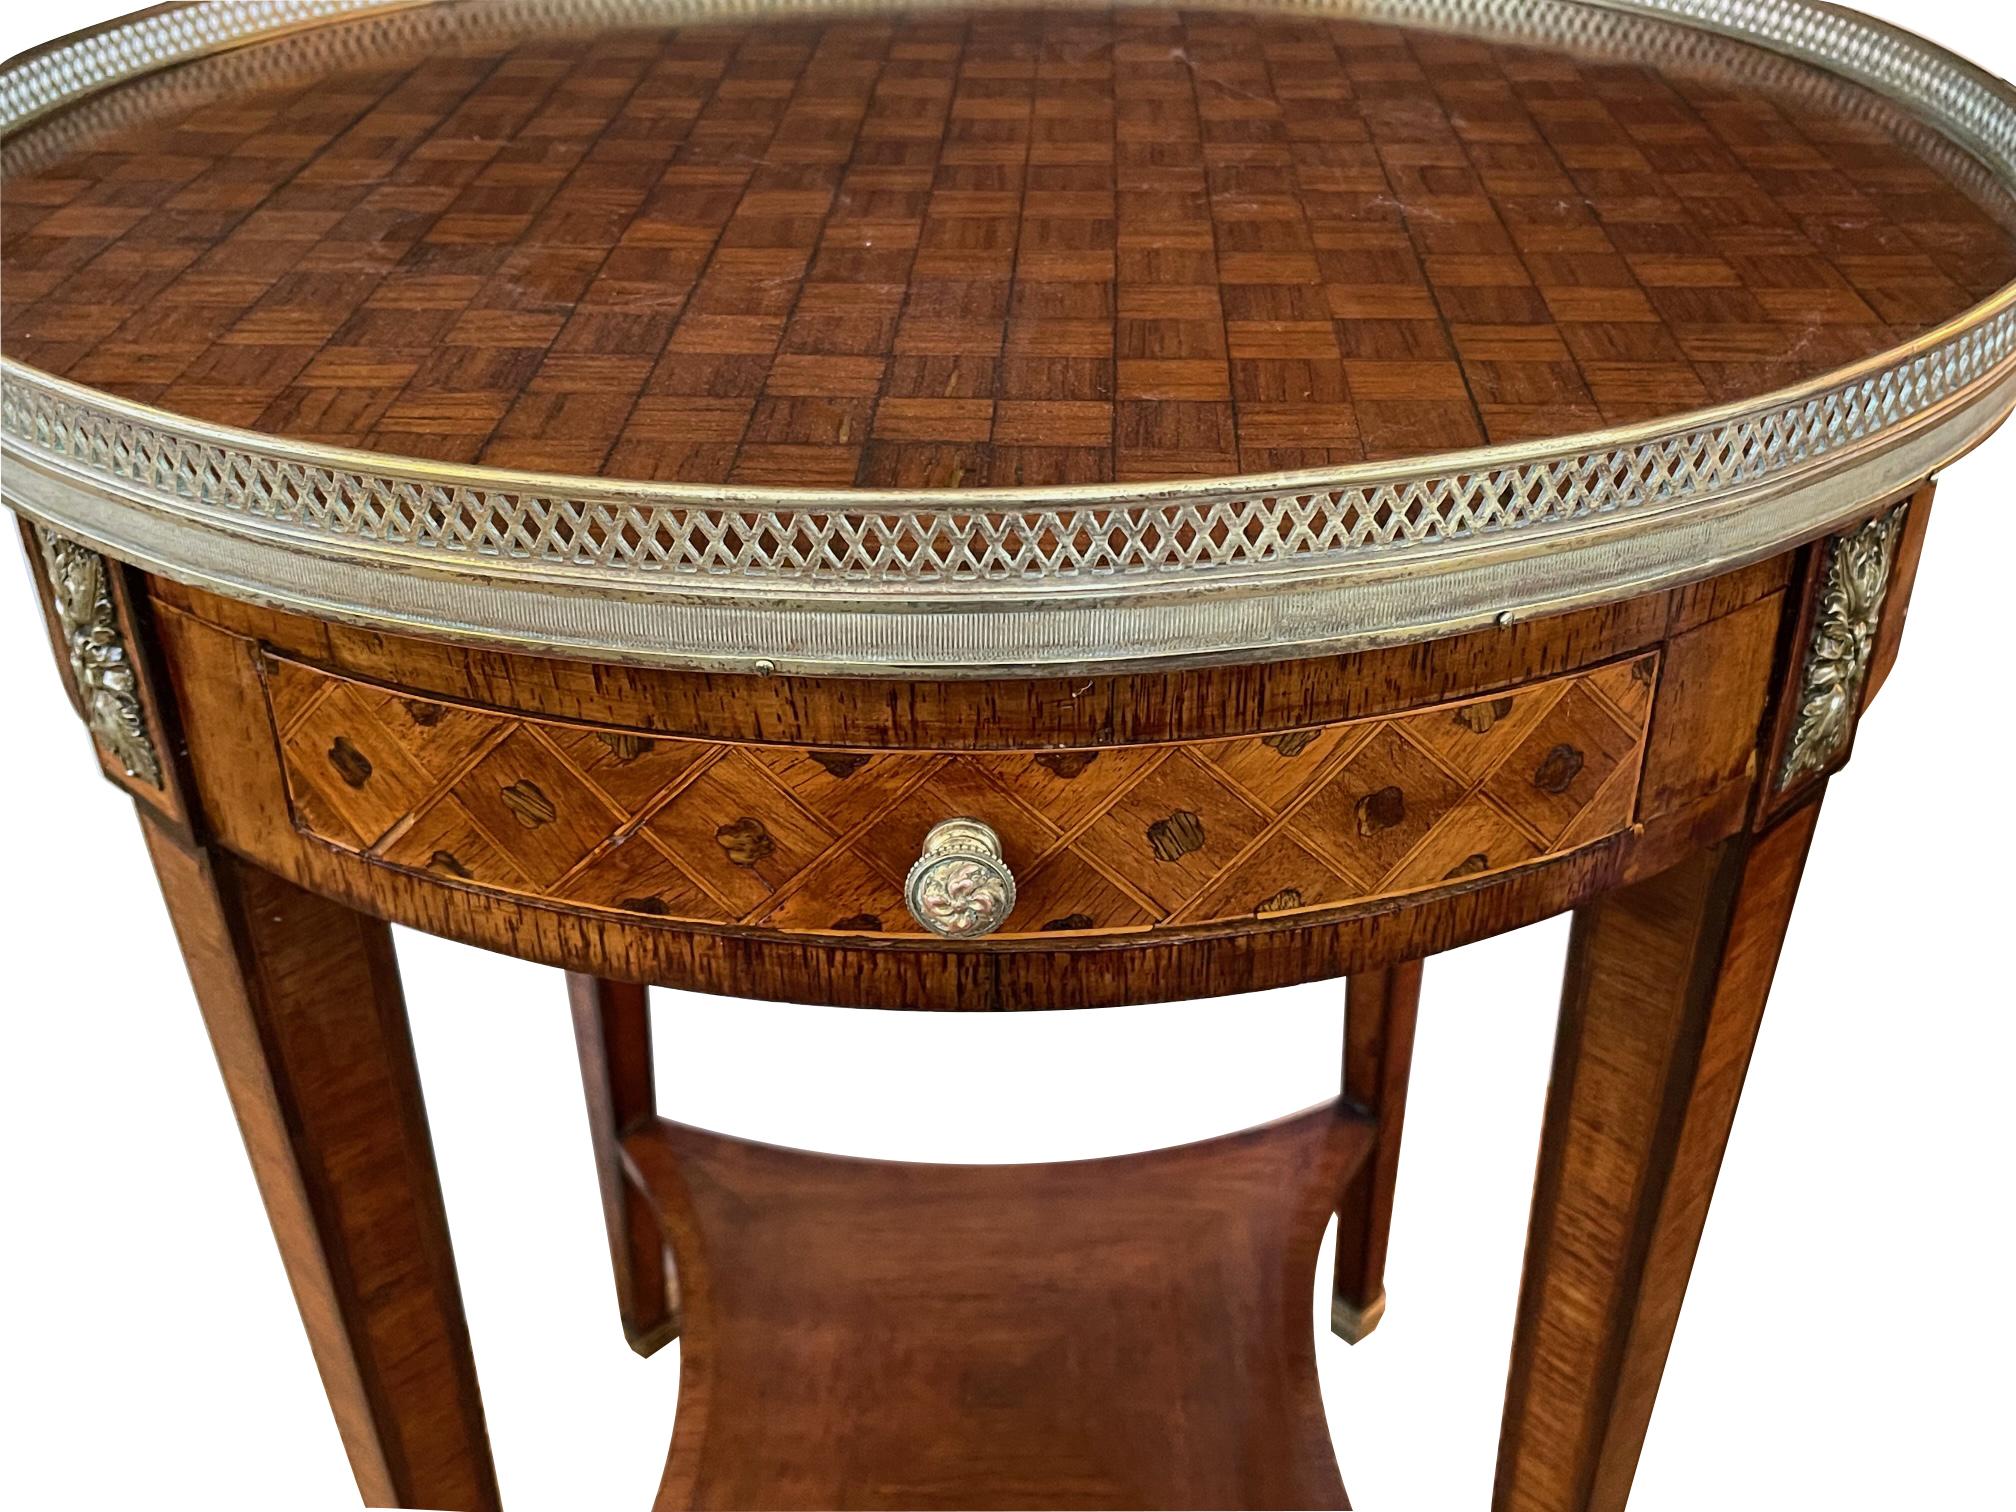 19th Century French Louis XVI Style Marquetry Inlaid Circular Side Table/Gueridon